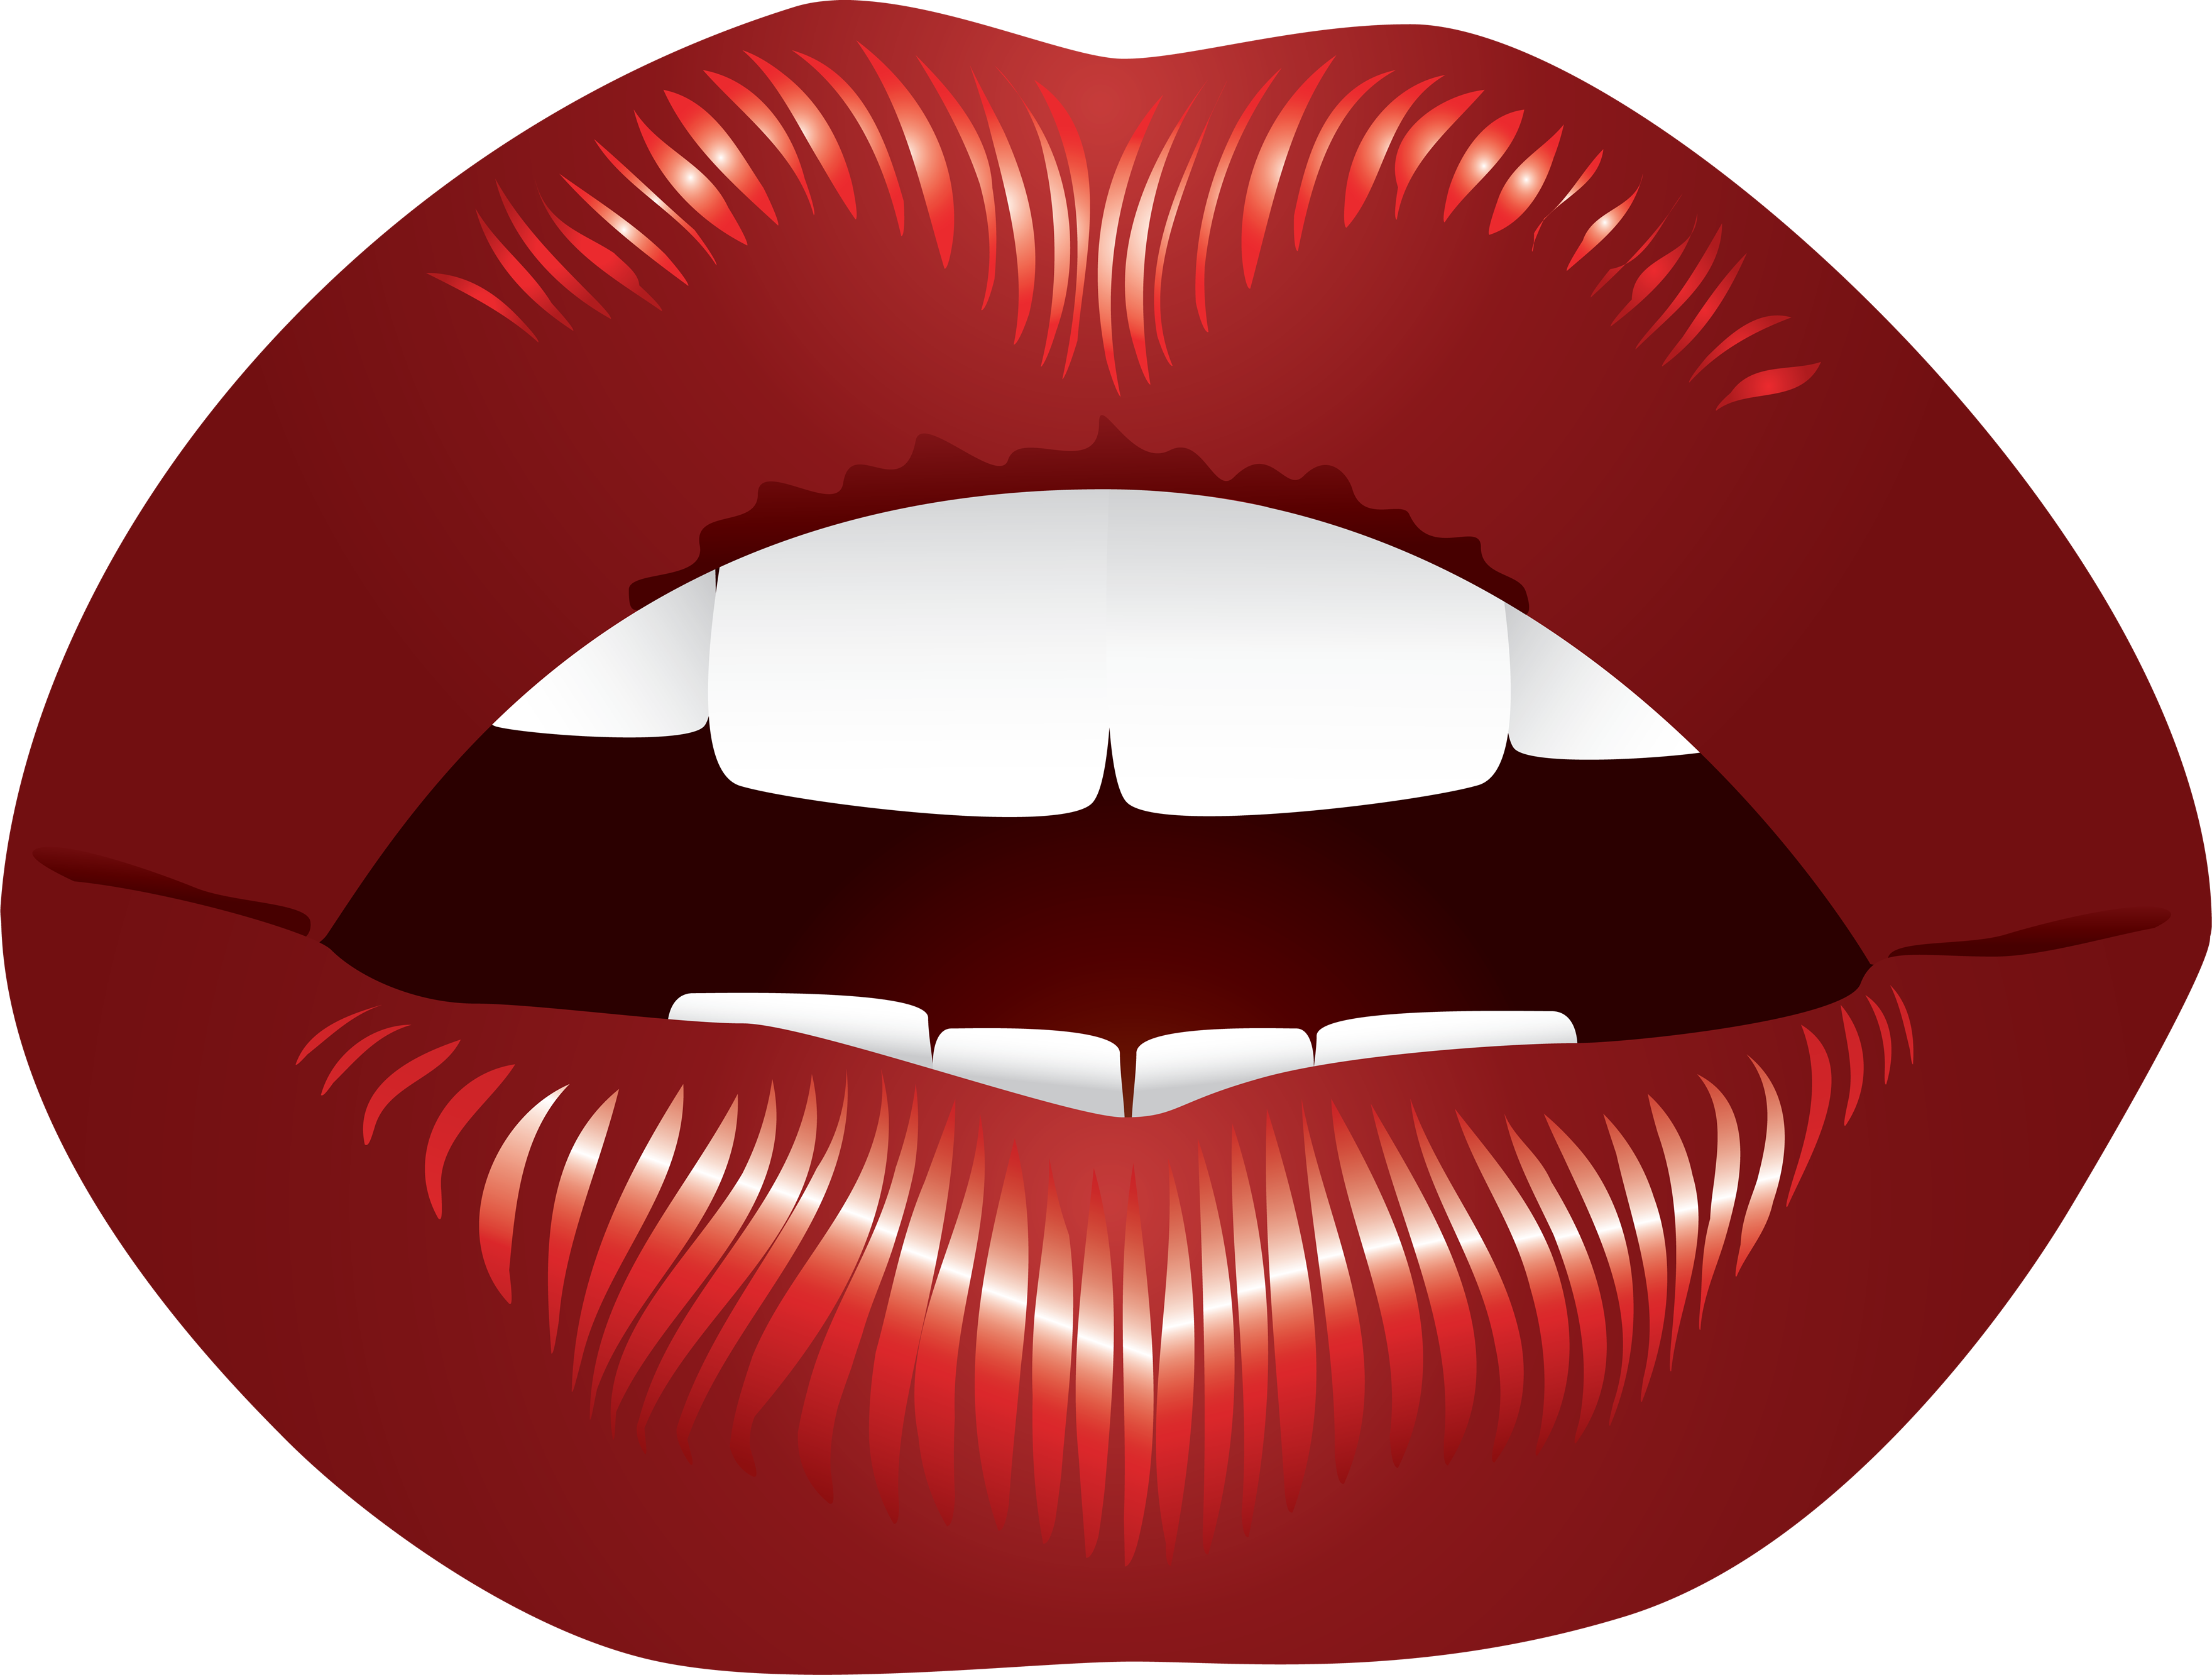 Download Clipart Lips In One Zip Archive  48 Png Images 68 35 Mb 